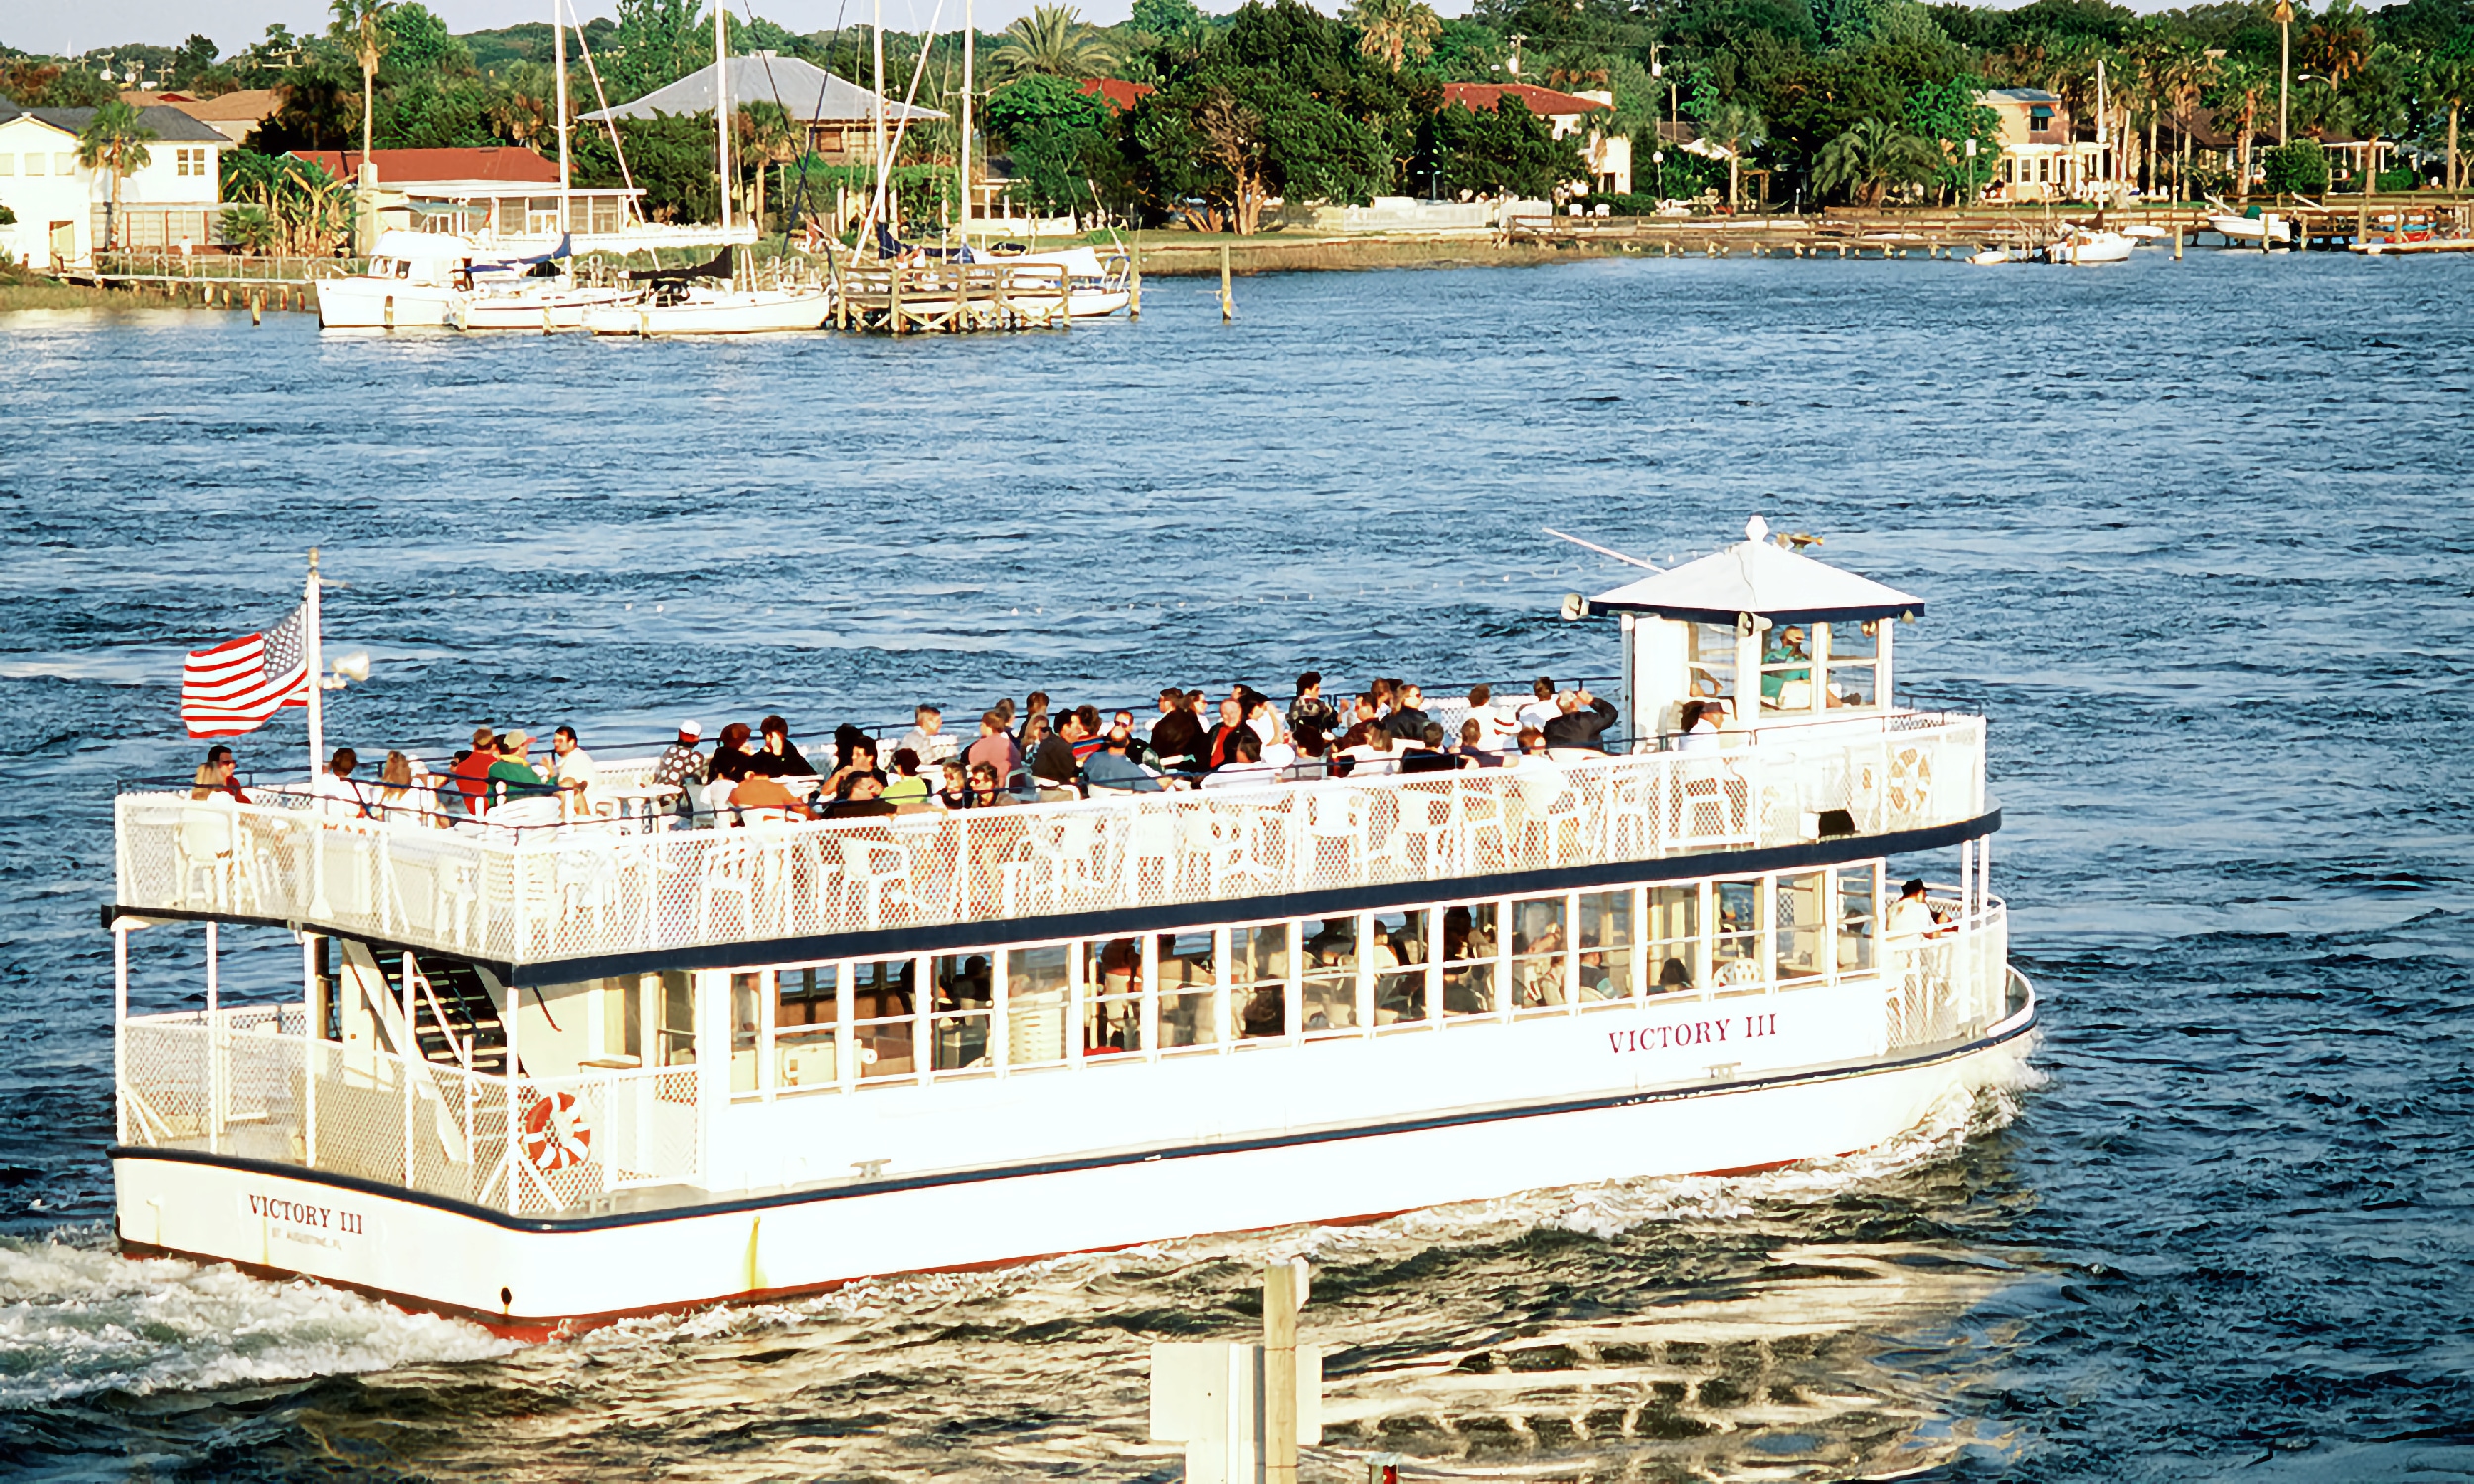 The Victory III of Scenic Cruise, traveling down the Matanzas on a bright day 